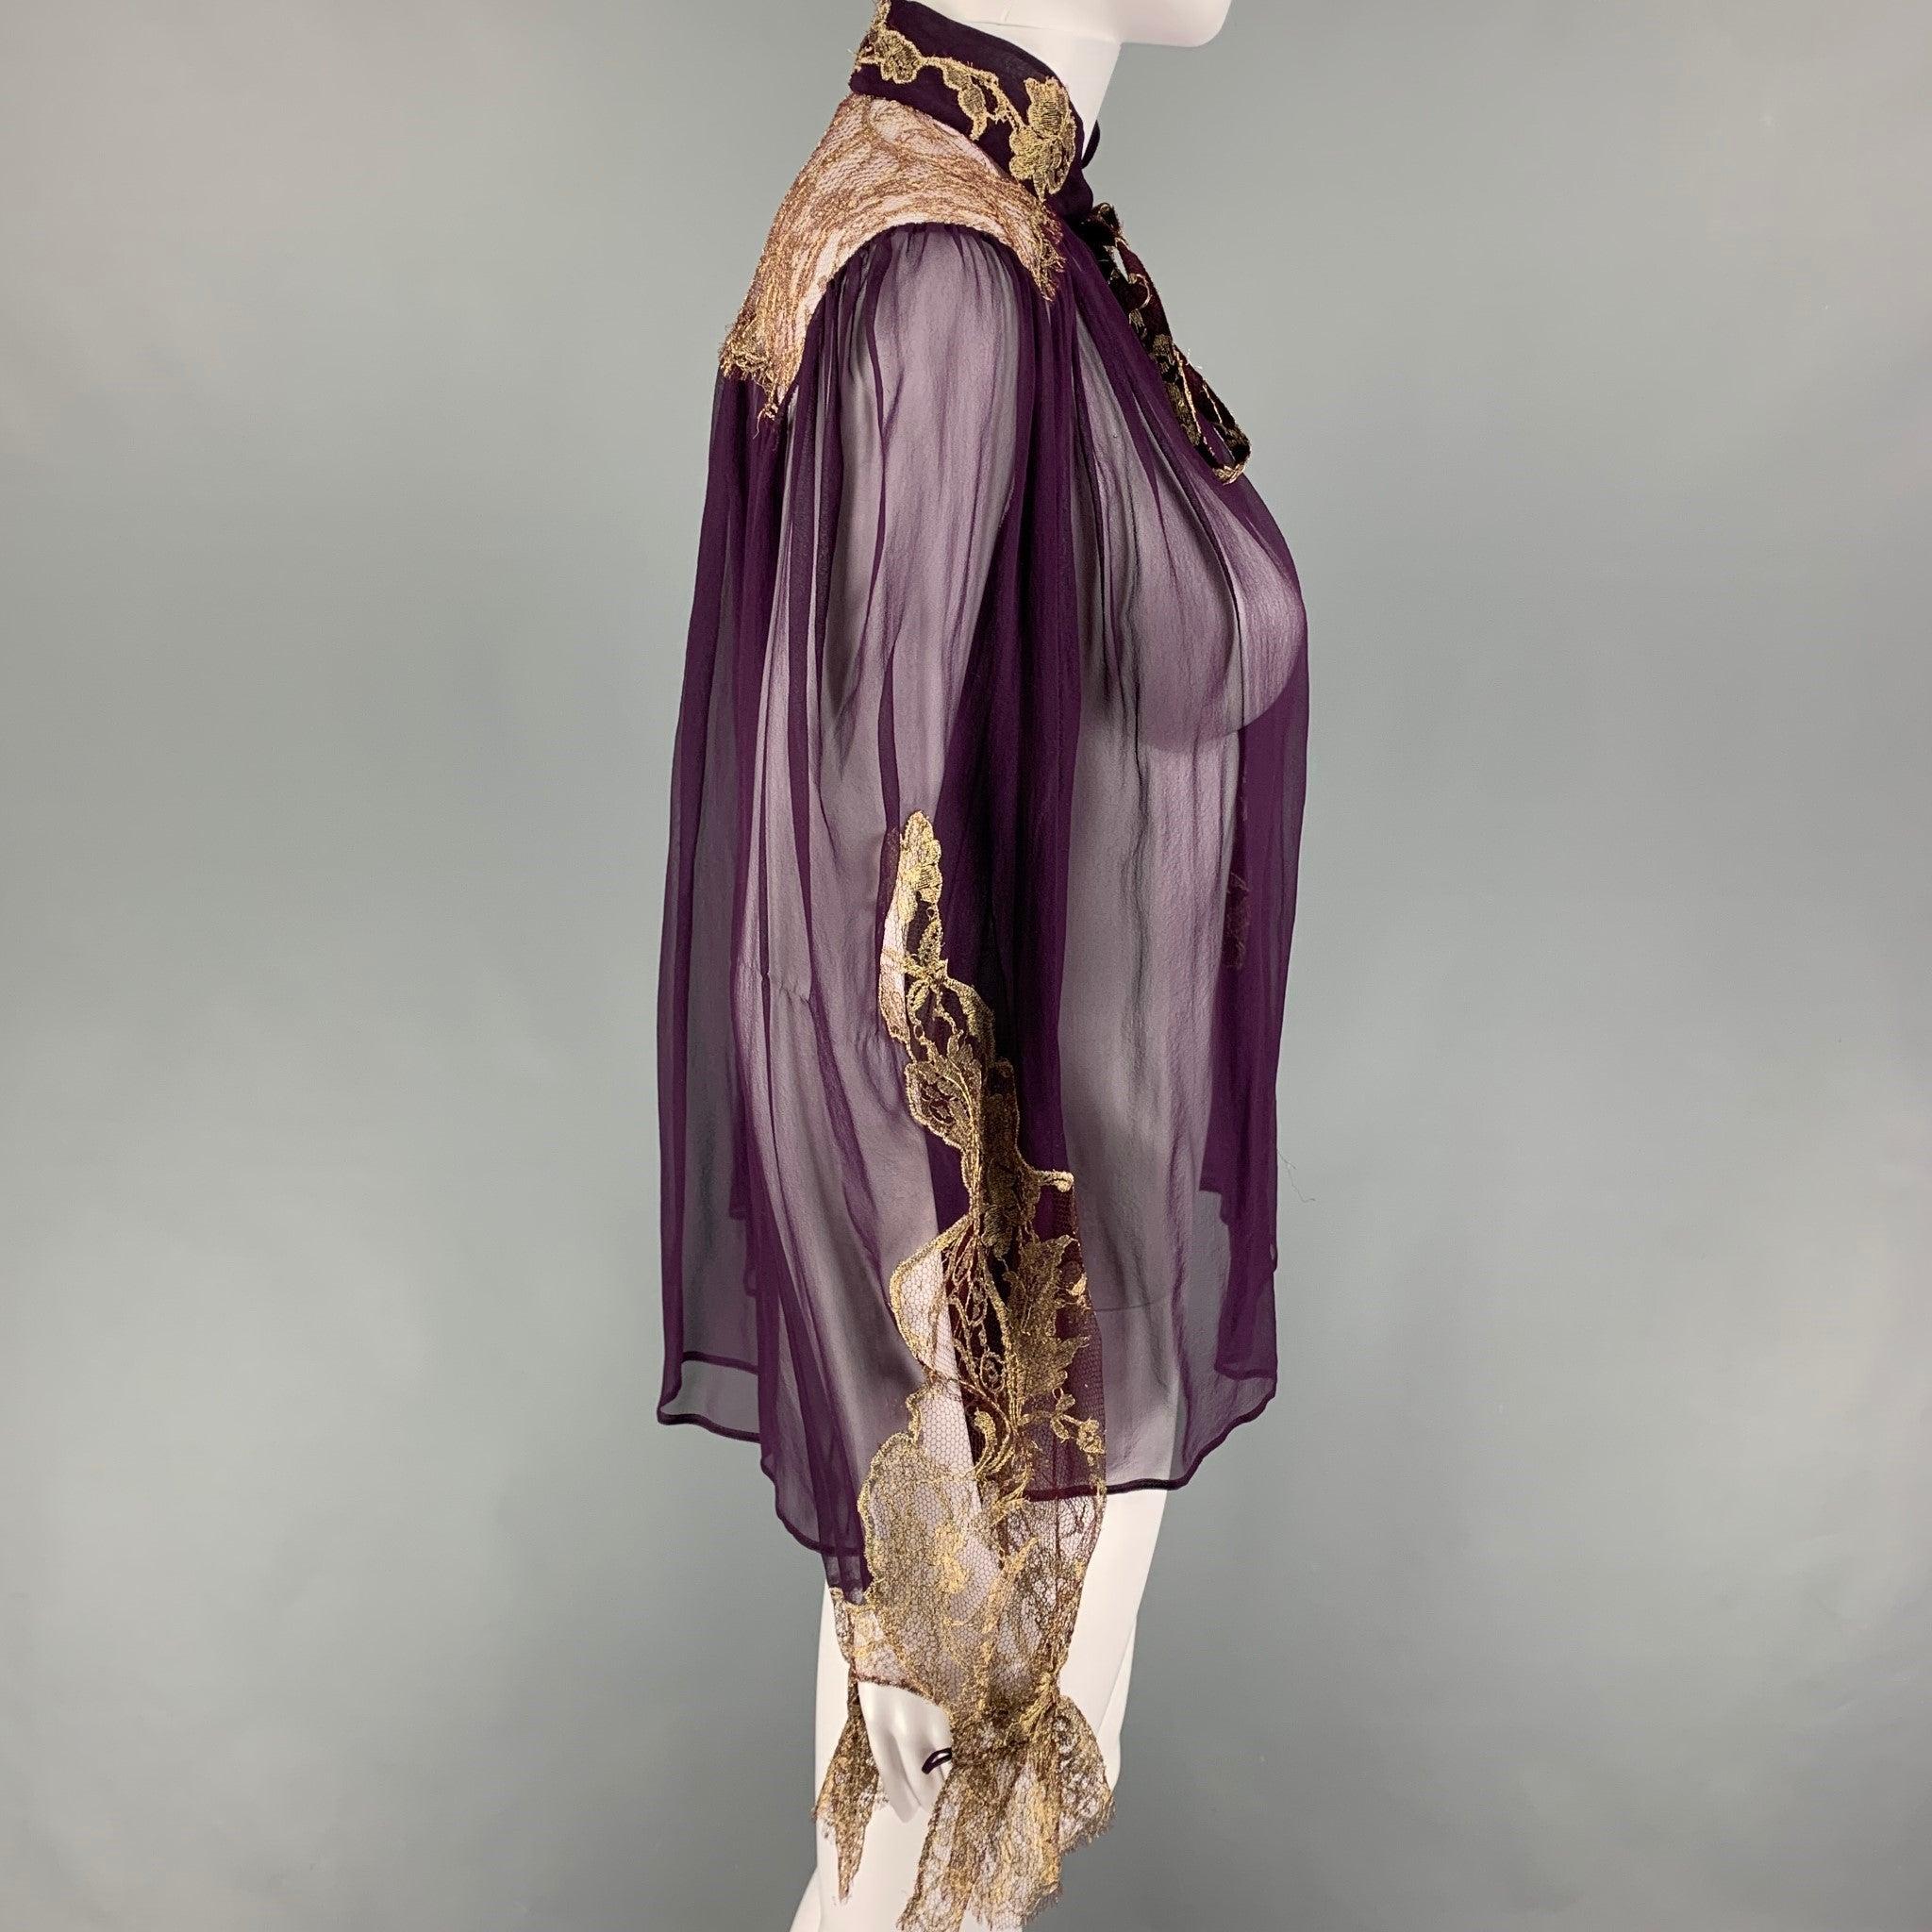 SALVATORE FERRAGAMO top comes in a eggplant silk featuring a gold tone lace design, ruffled hem sleeves, and a front self-tie strap. Made in Italy.
Very Good
Pre-Owned Condition. 

Marked:  38 

Measurements: 
 
Shoulder: 15.5 inches Bust: 42 inches